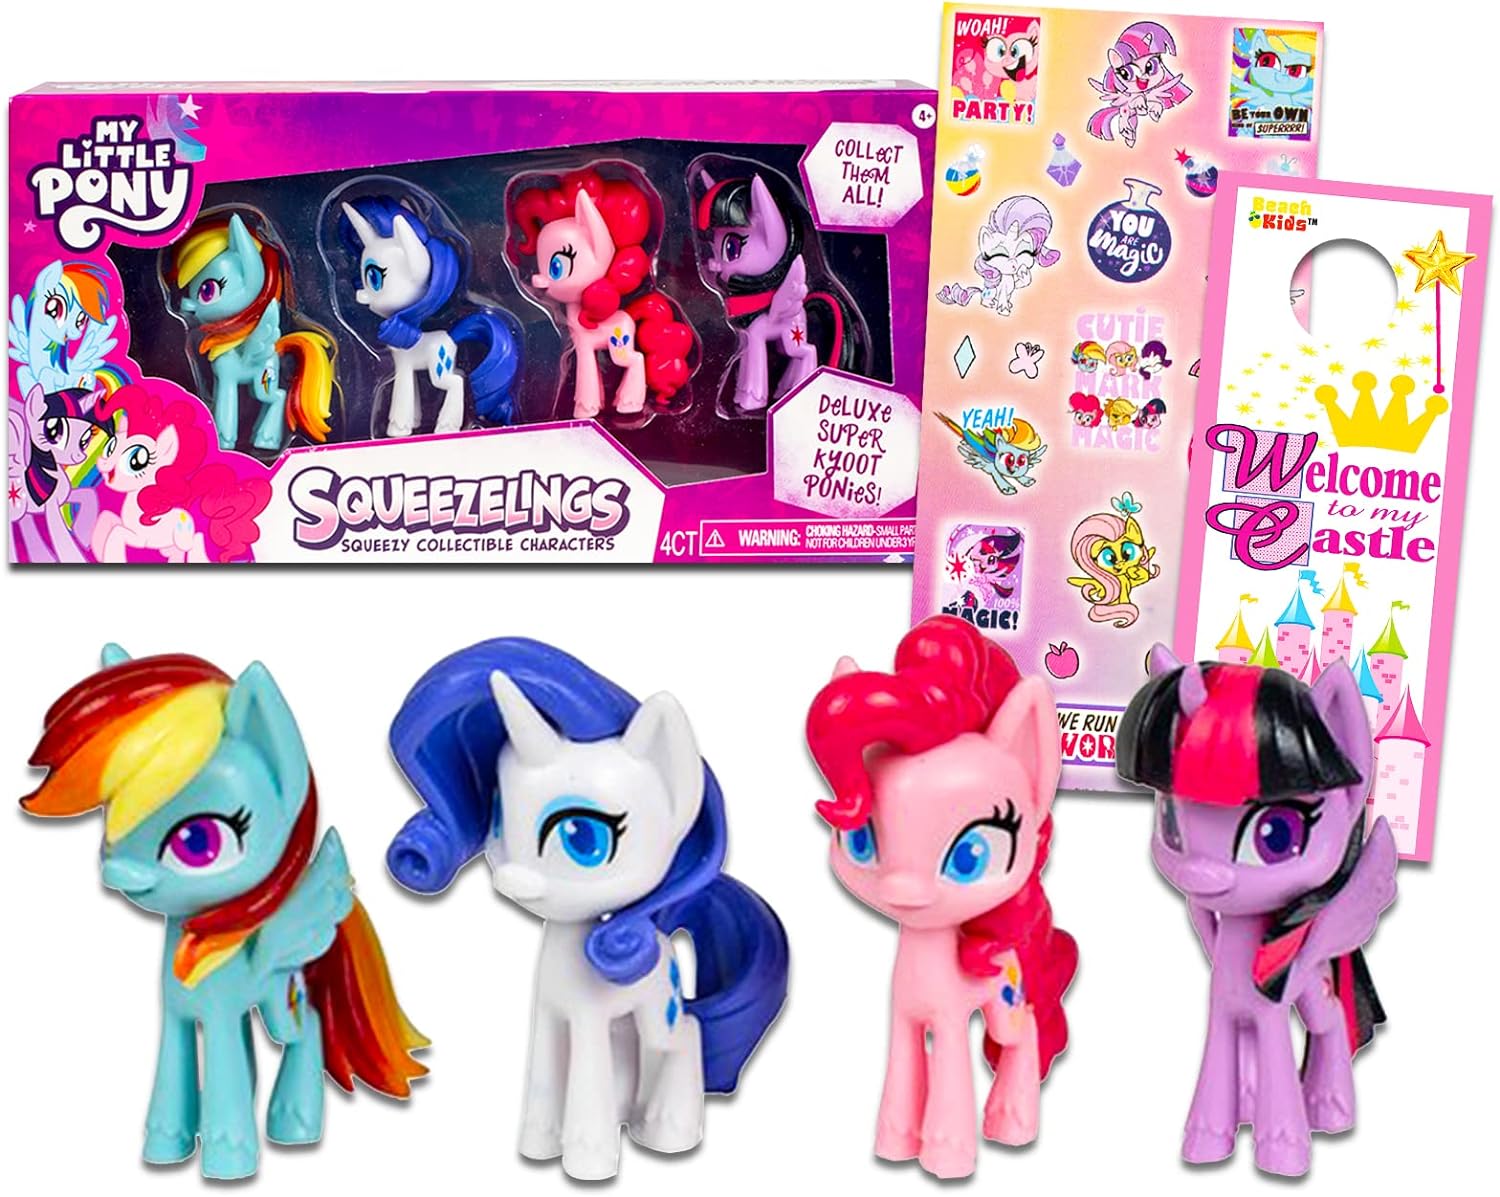 MLP Squeezelings Collectable Pony Character 3-Pack Bundle